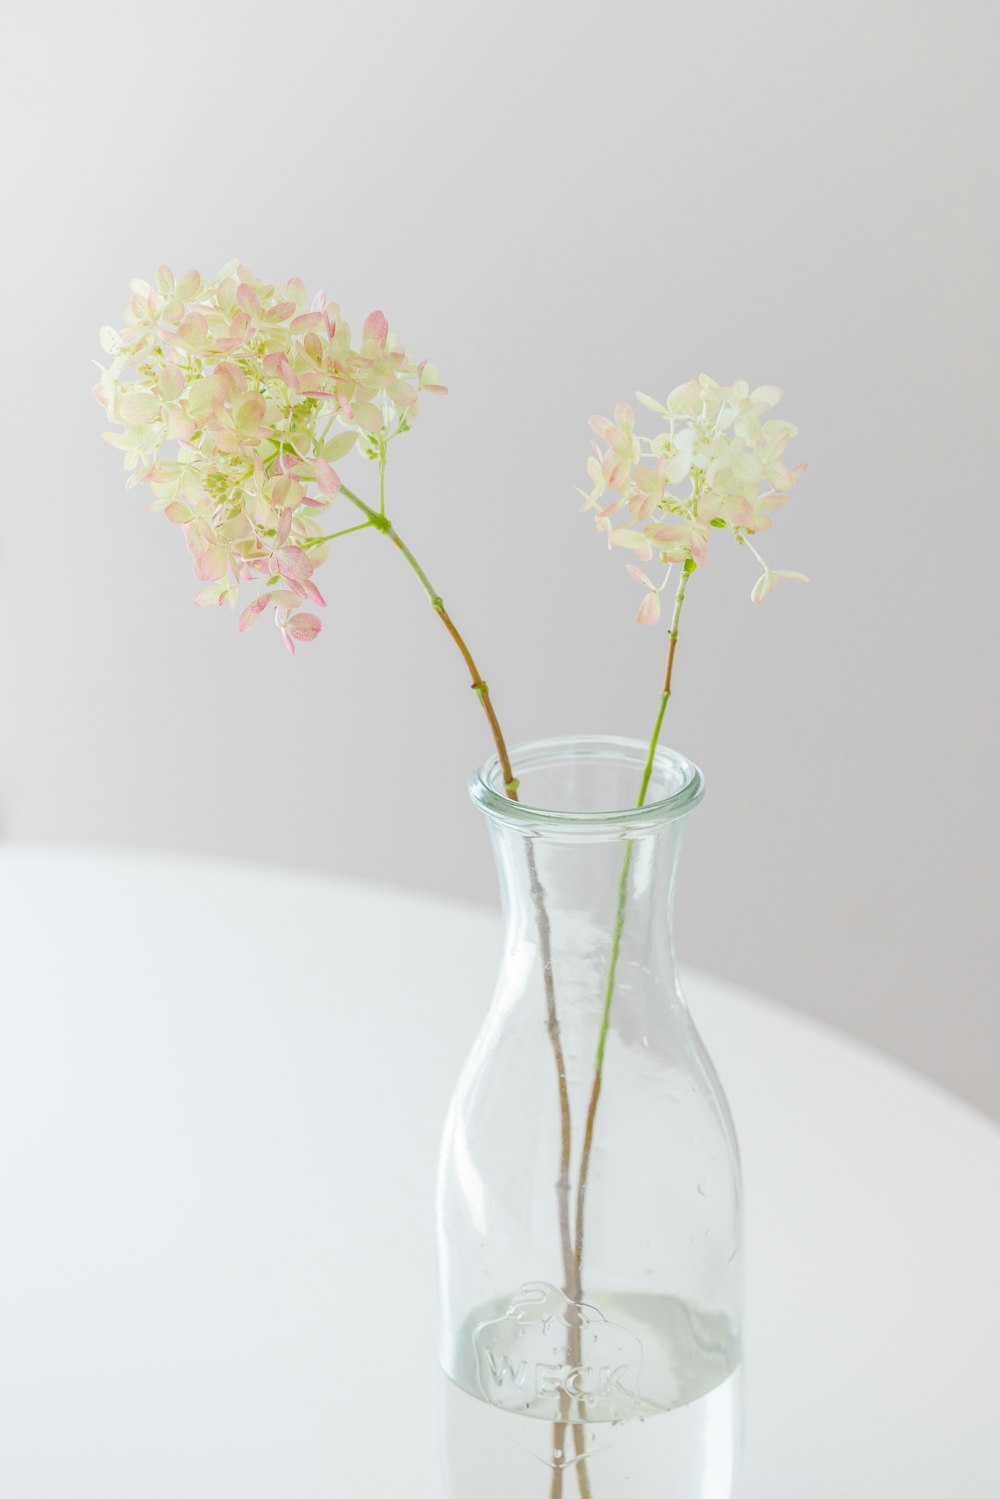 a vase with flowers